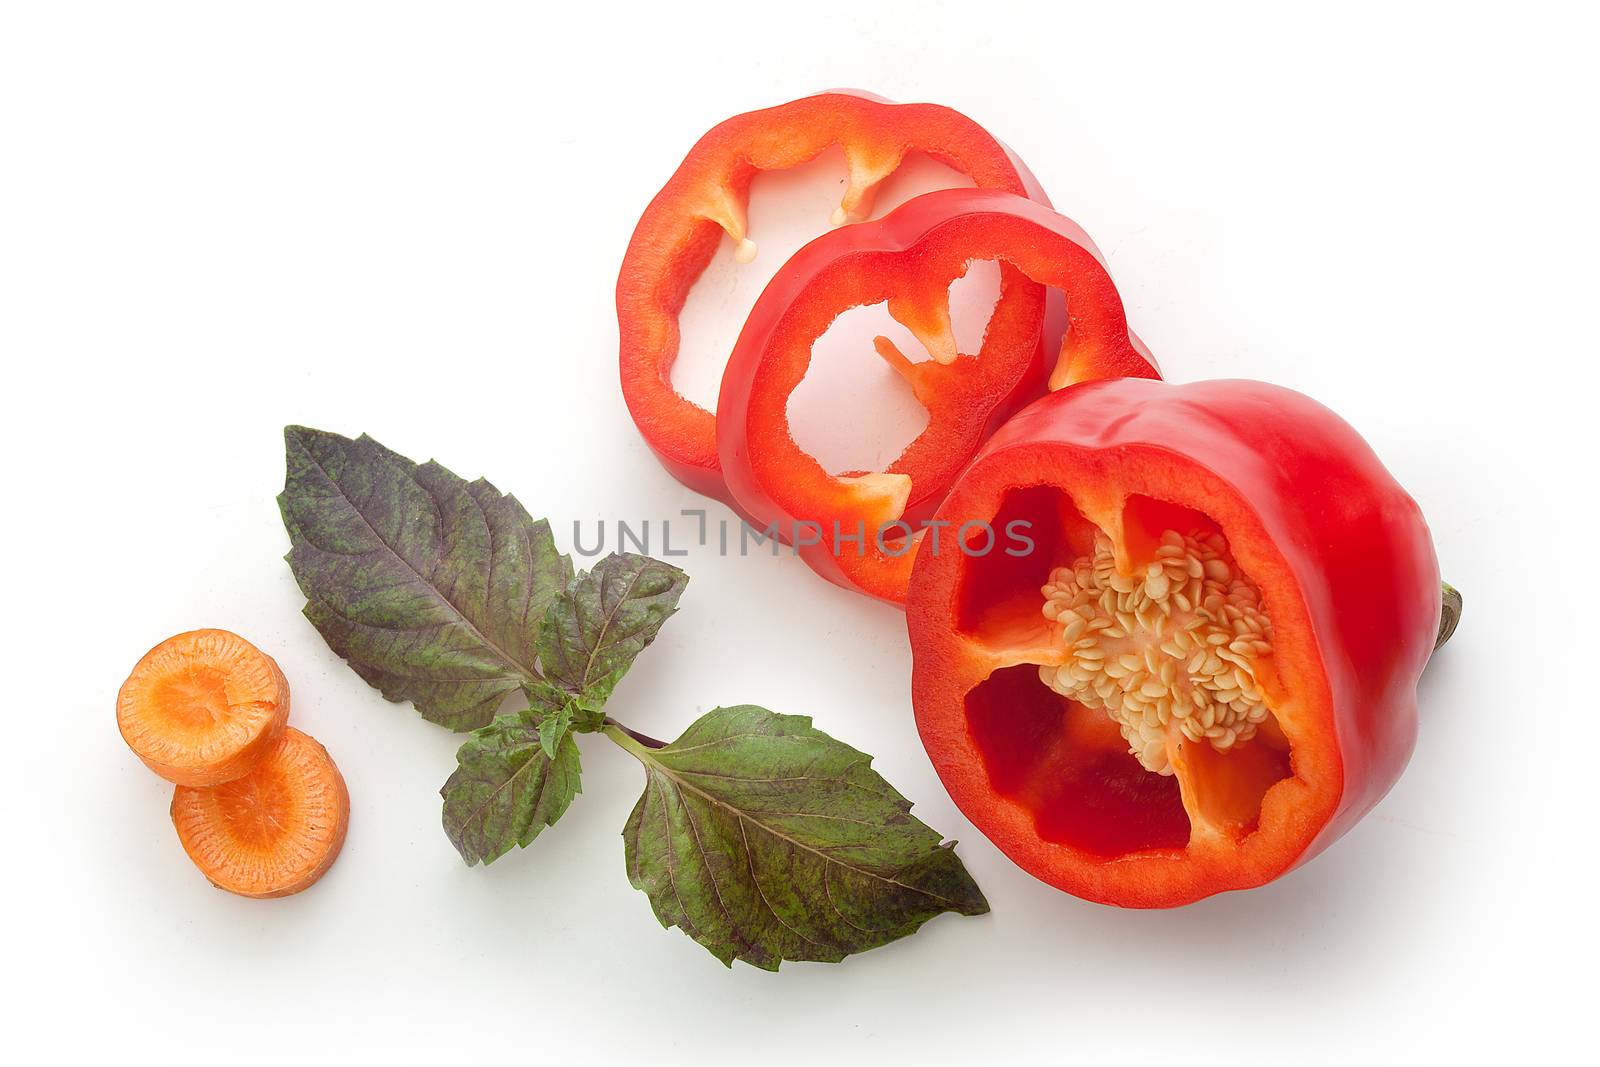 Top view of sliced red paprika, sliced carrot and branch of fresh green basil on the white background